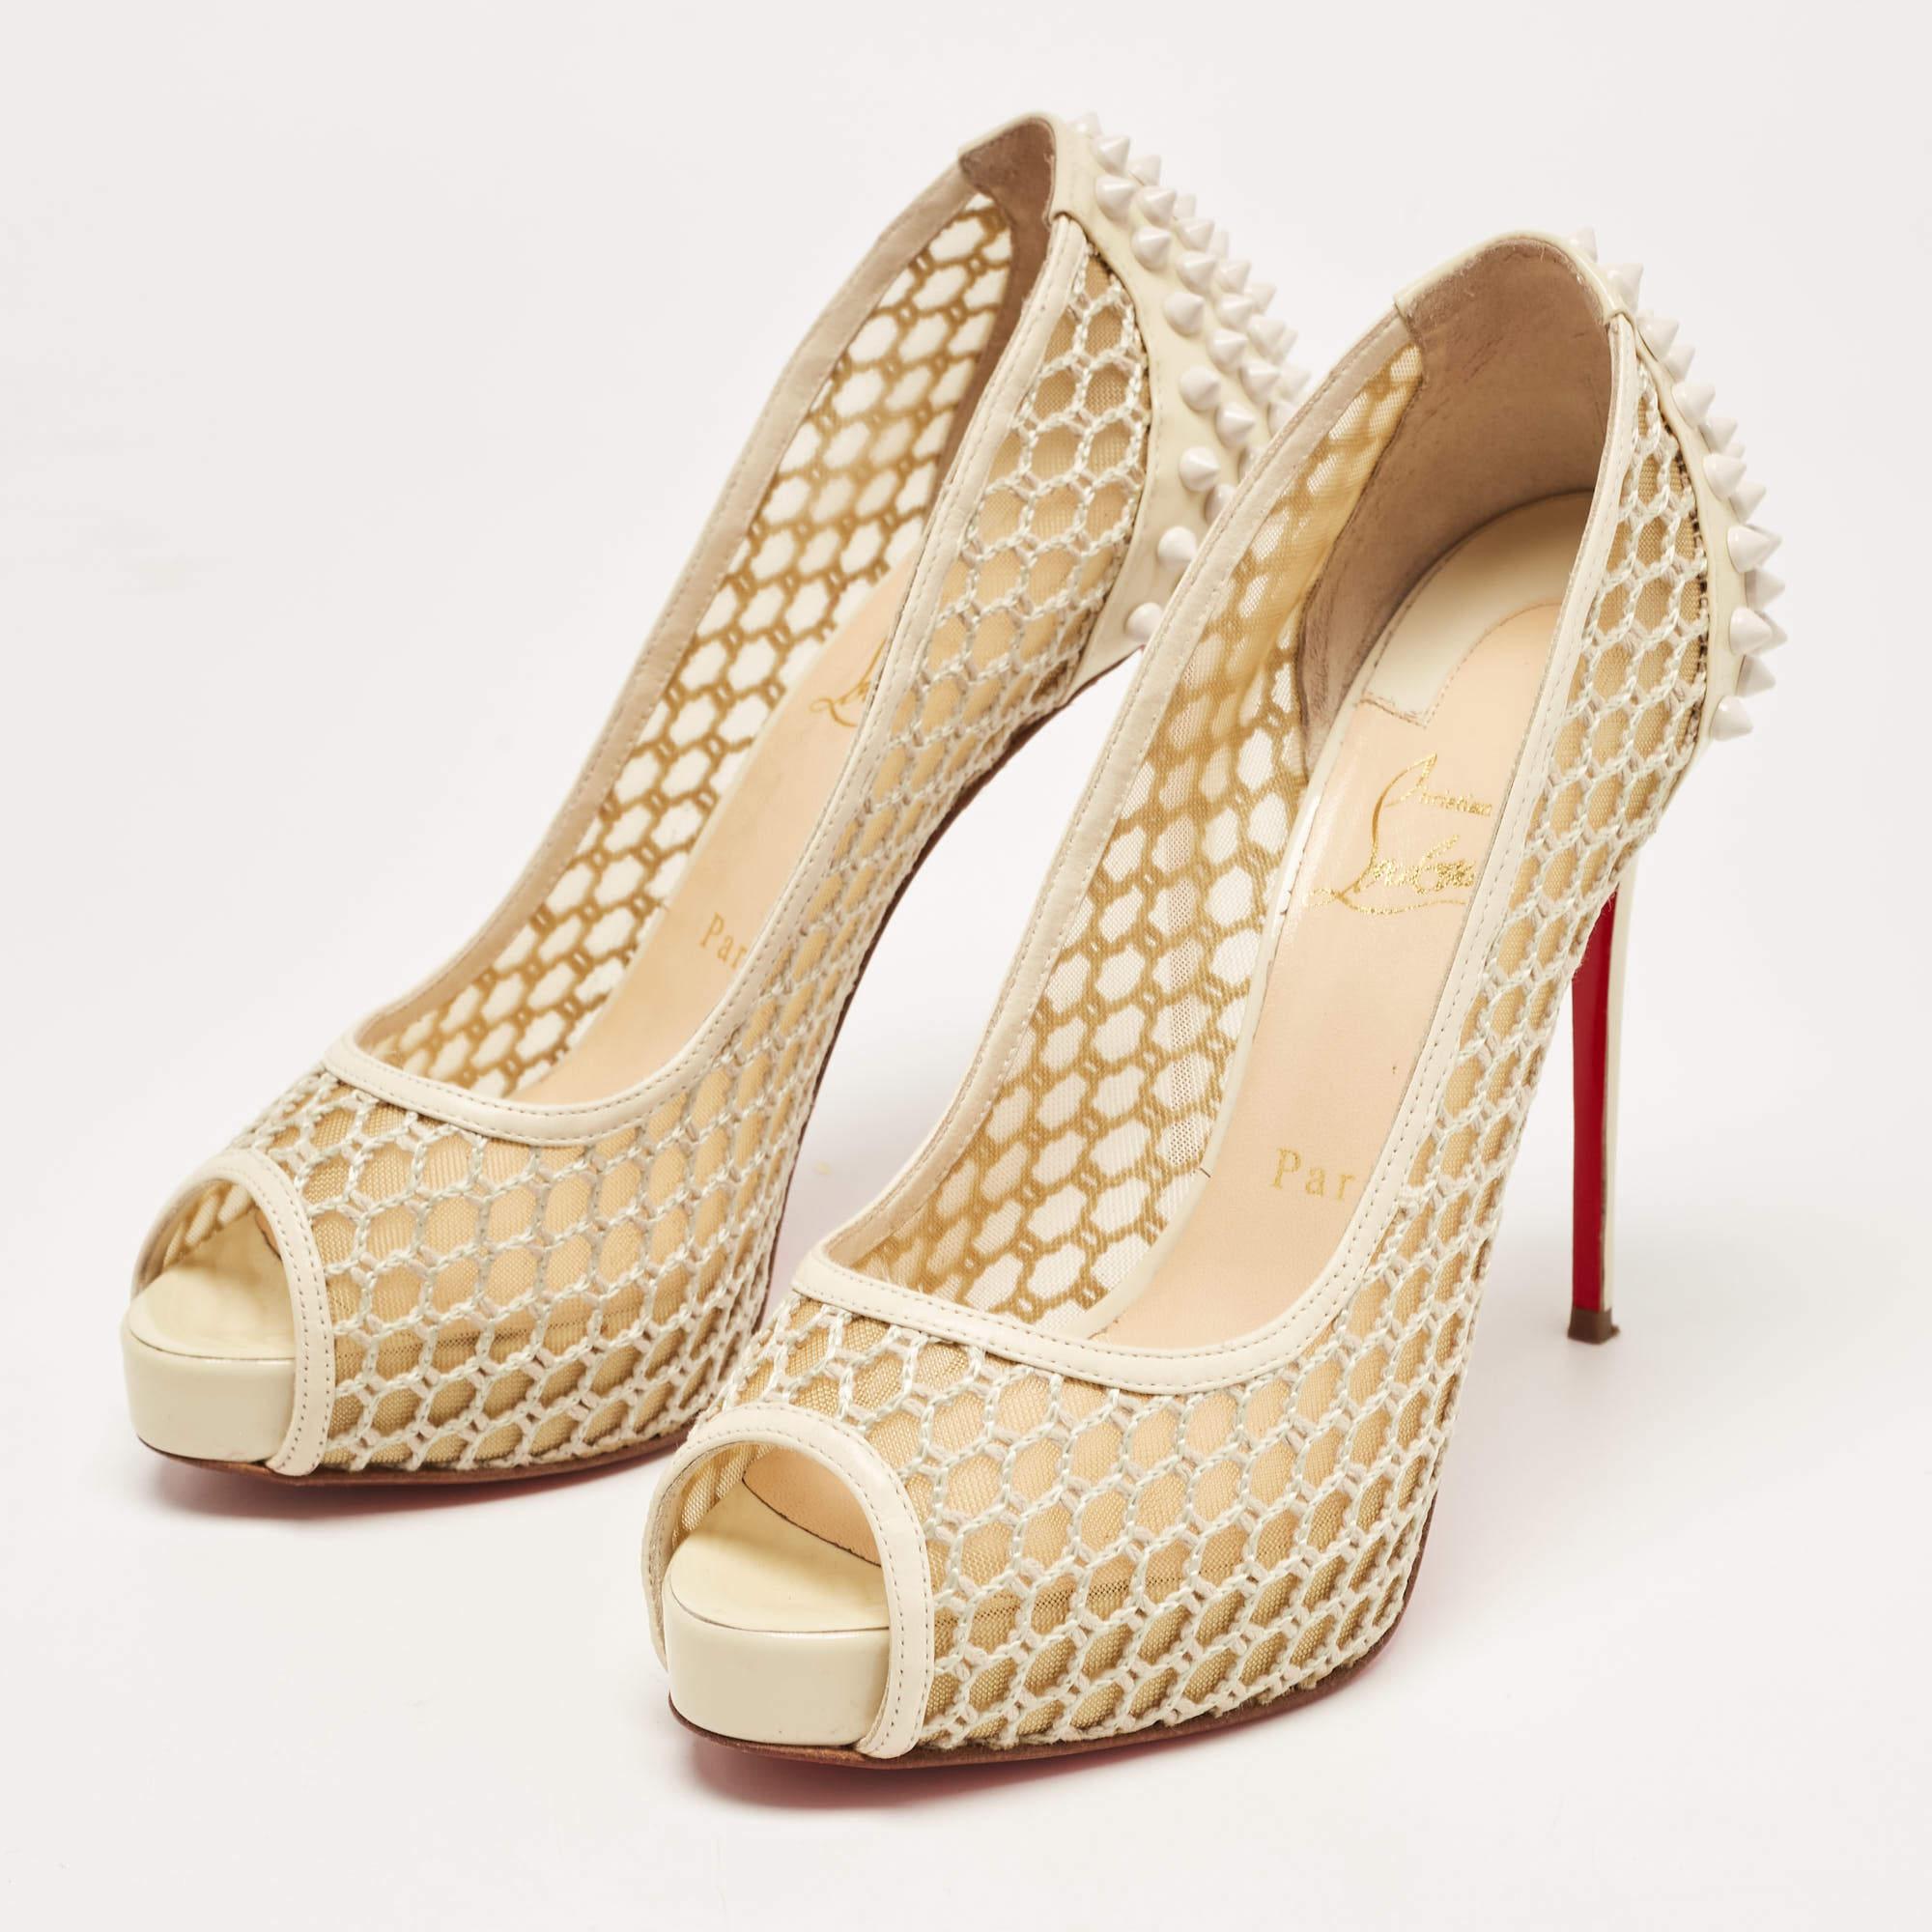 Women's Christian Louboutin Cream Patent Leather and Mesh Guni Spiked Peep Toe Pumps Siz For Sale